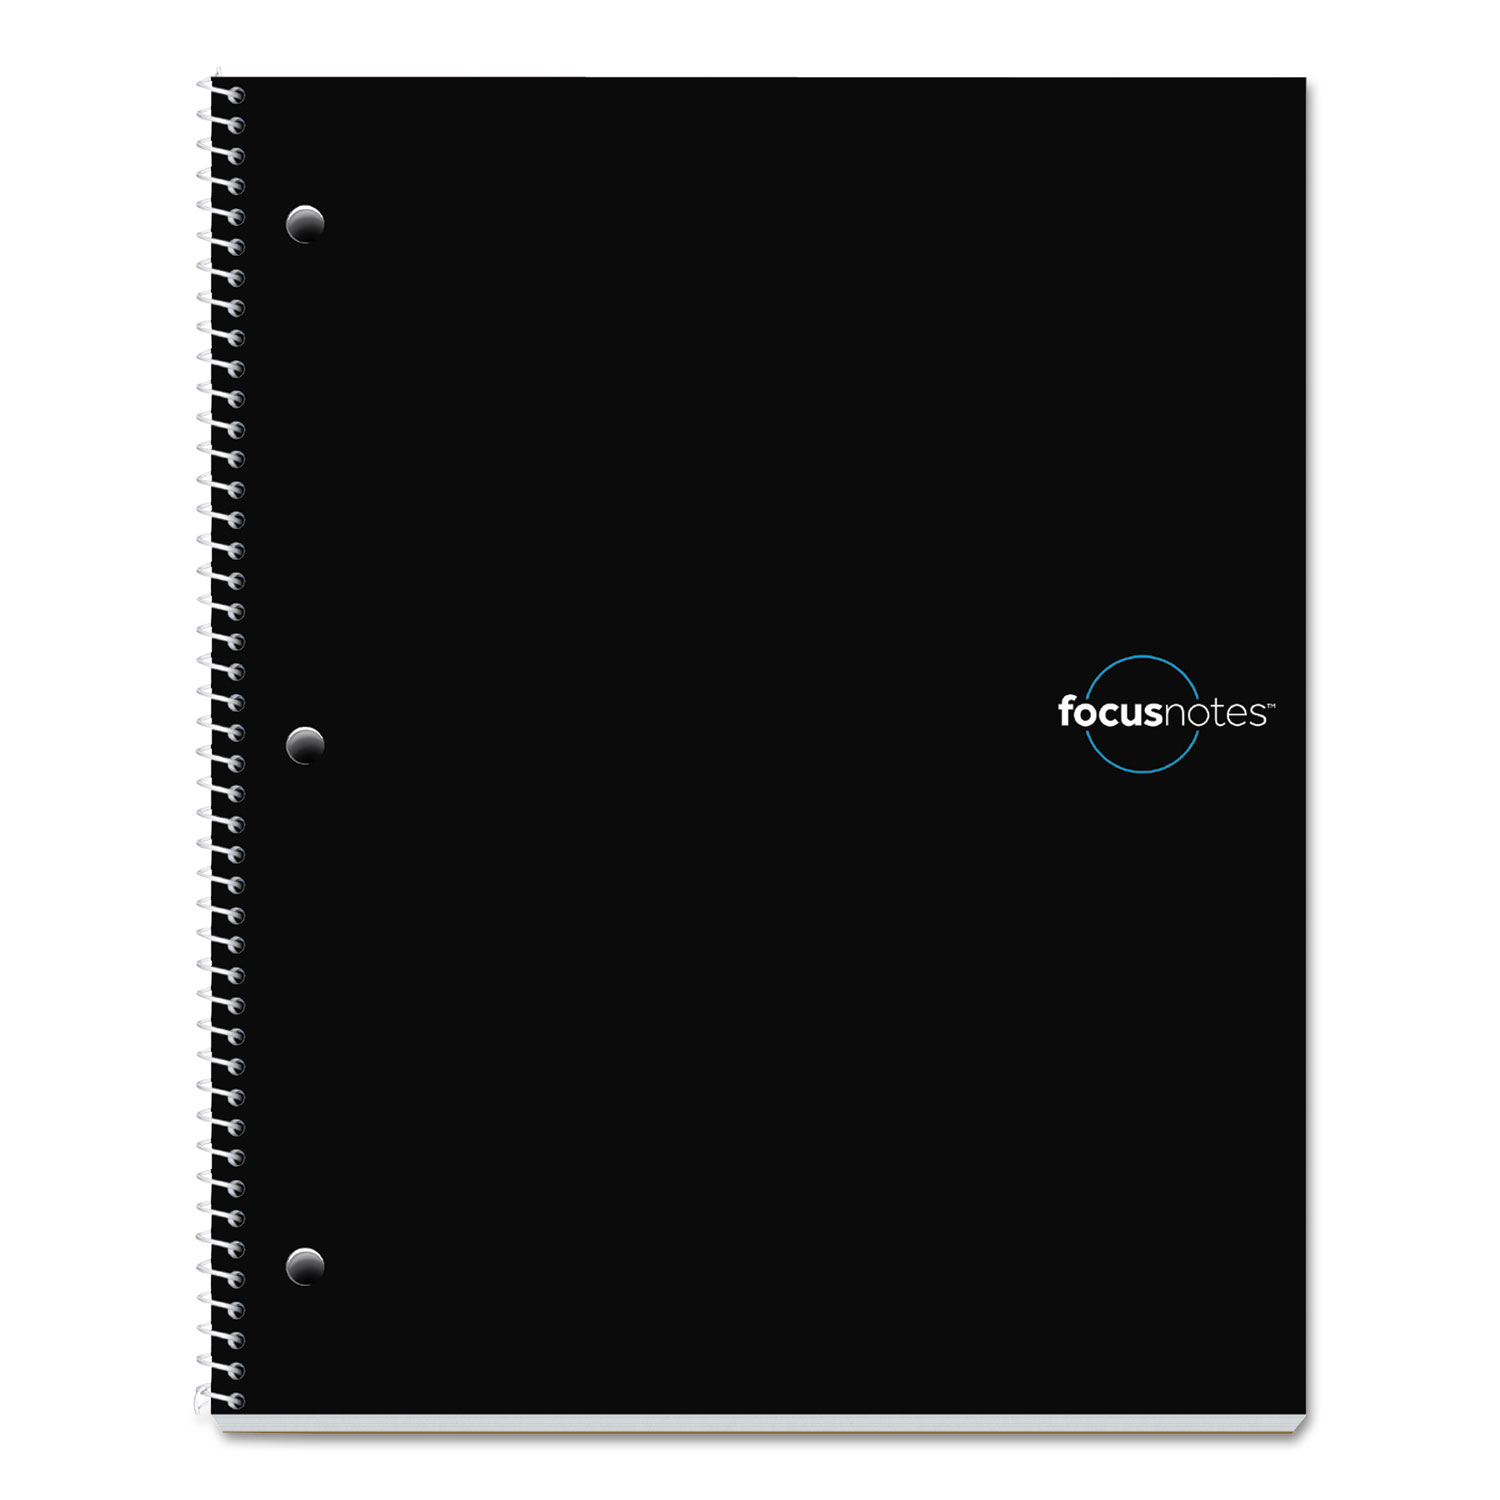  TOPS 90223 FocusNotes Notebook, 1 Subject, Lecture Notes, Blue Cover, 11 x 9, 100 Pages (TOP90223) 